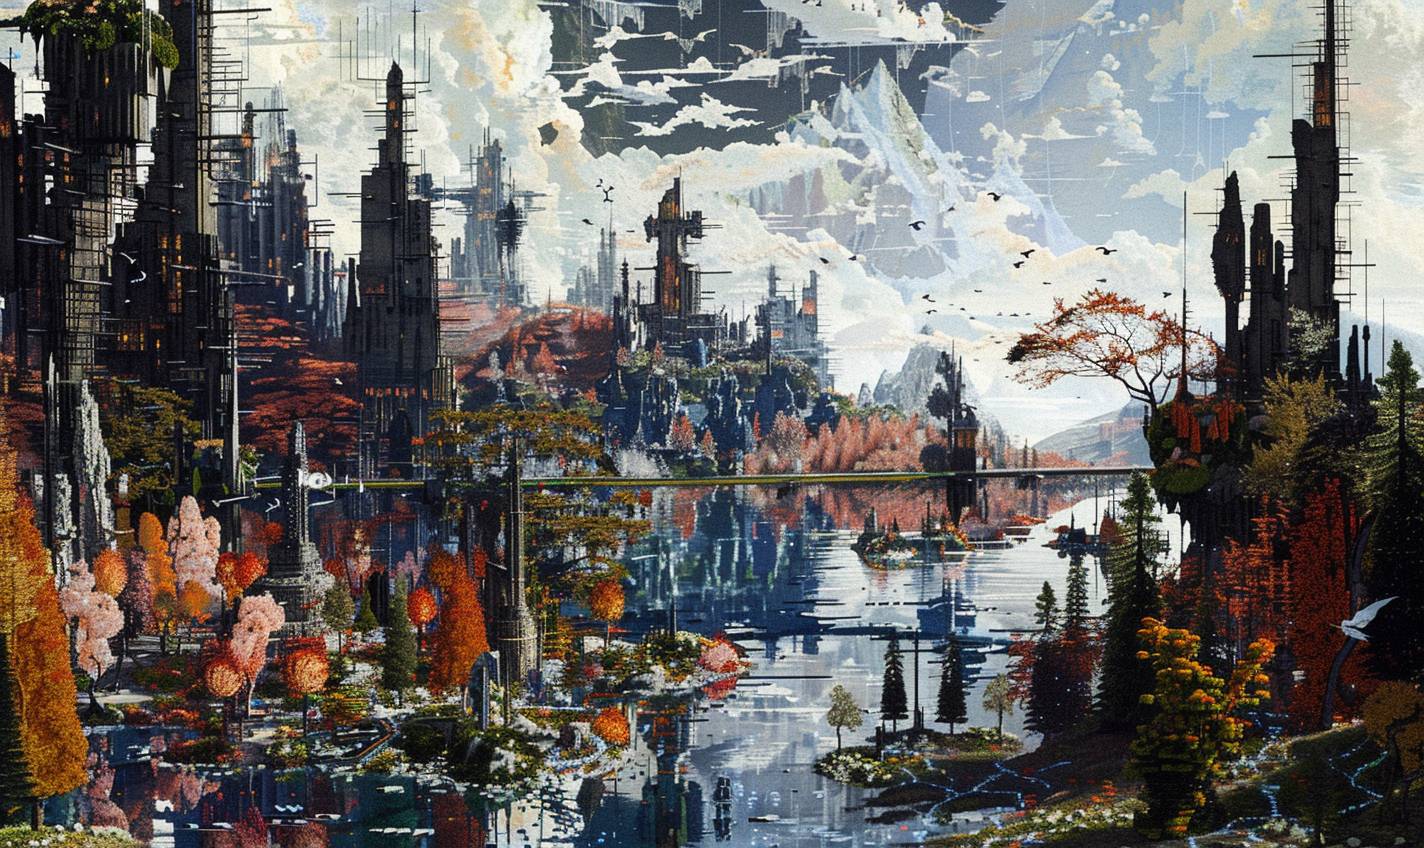 In style of Grandma Moses, Cybernetic cityscape teeming with artificial life